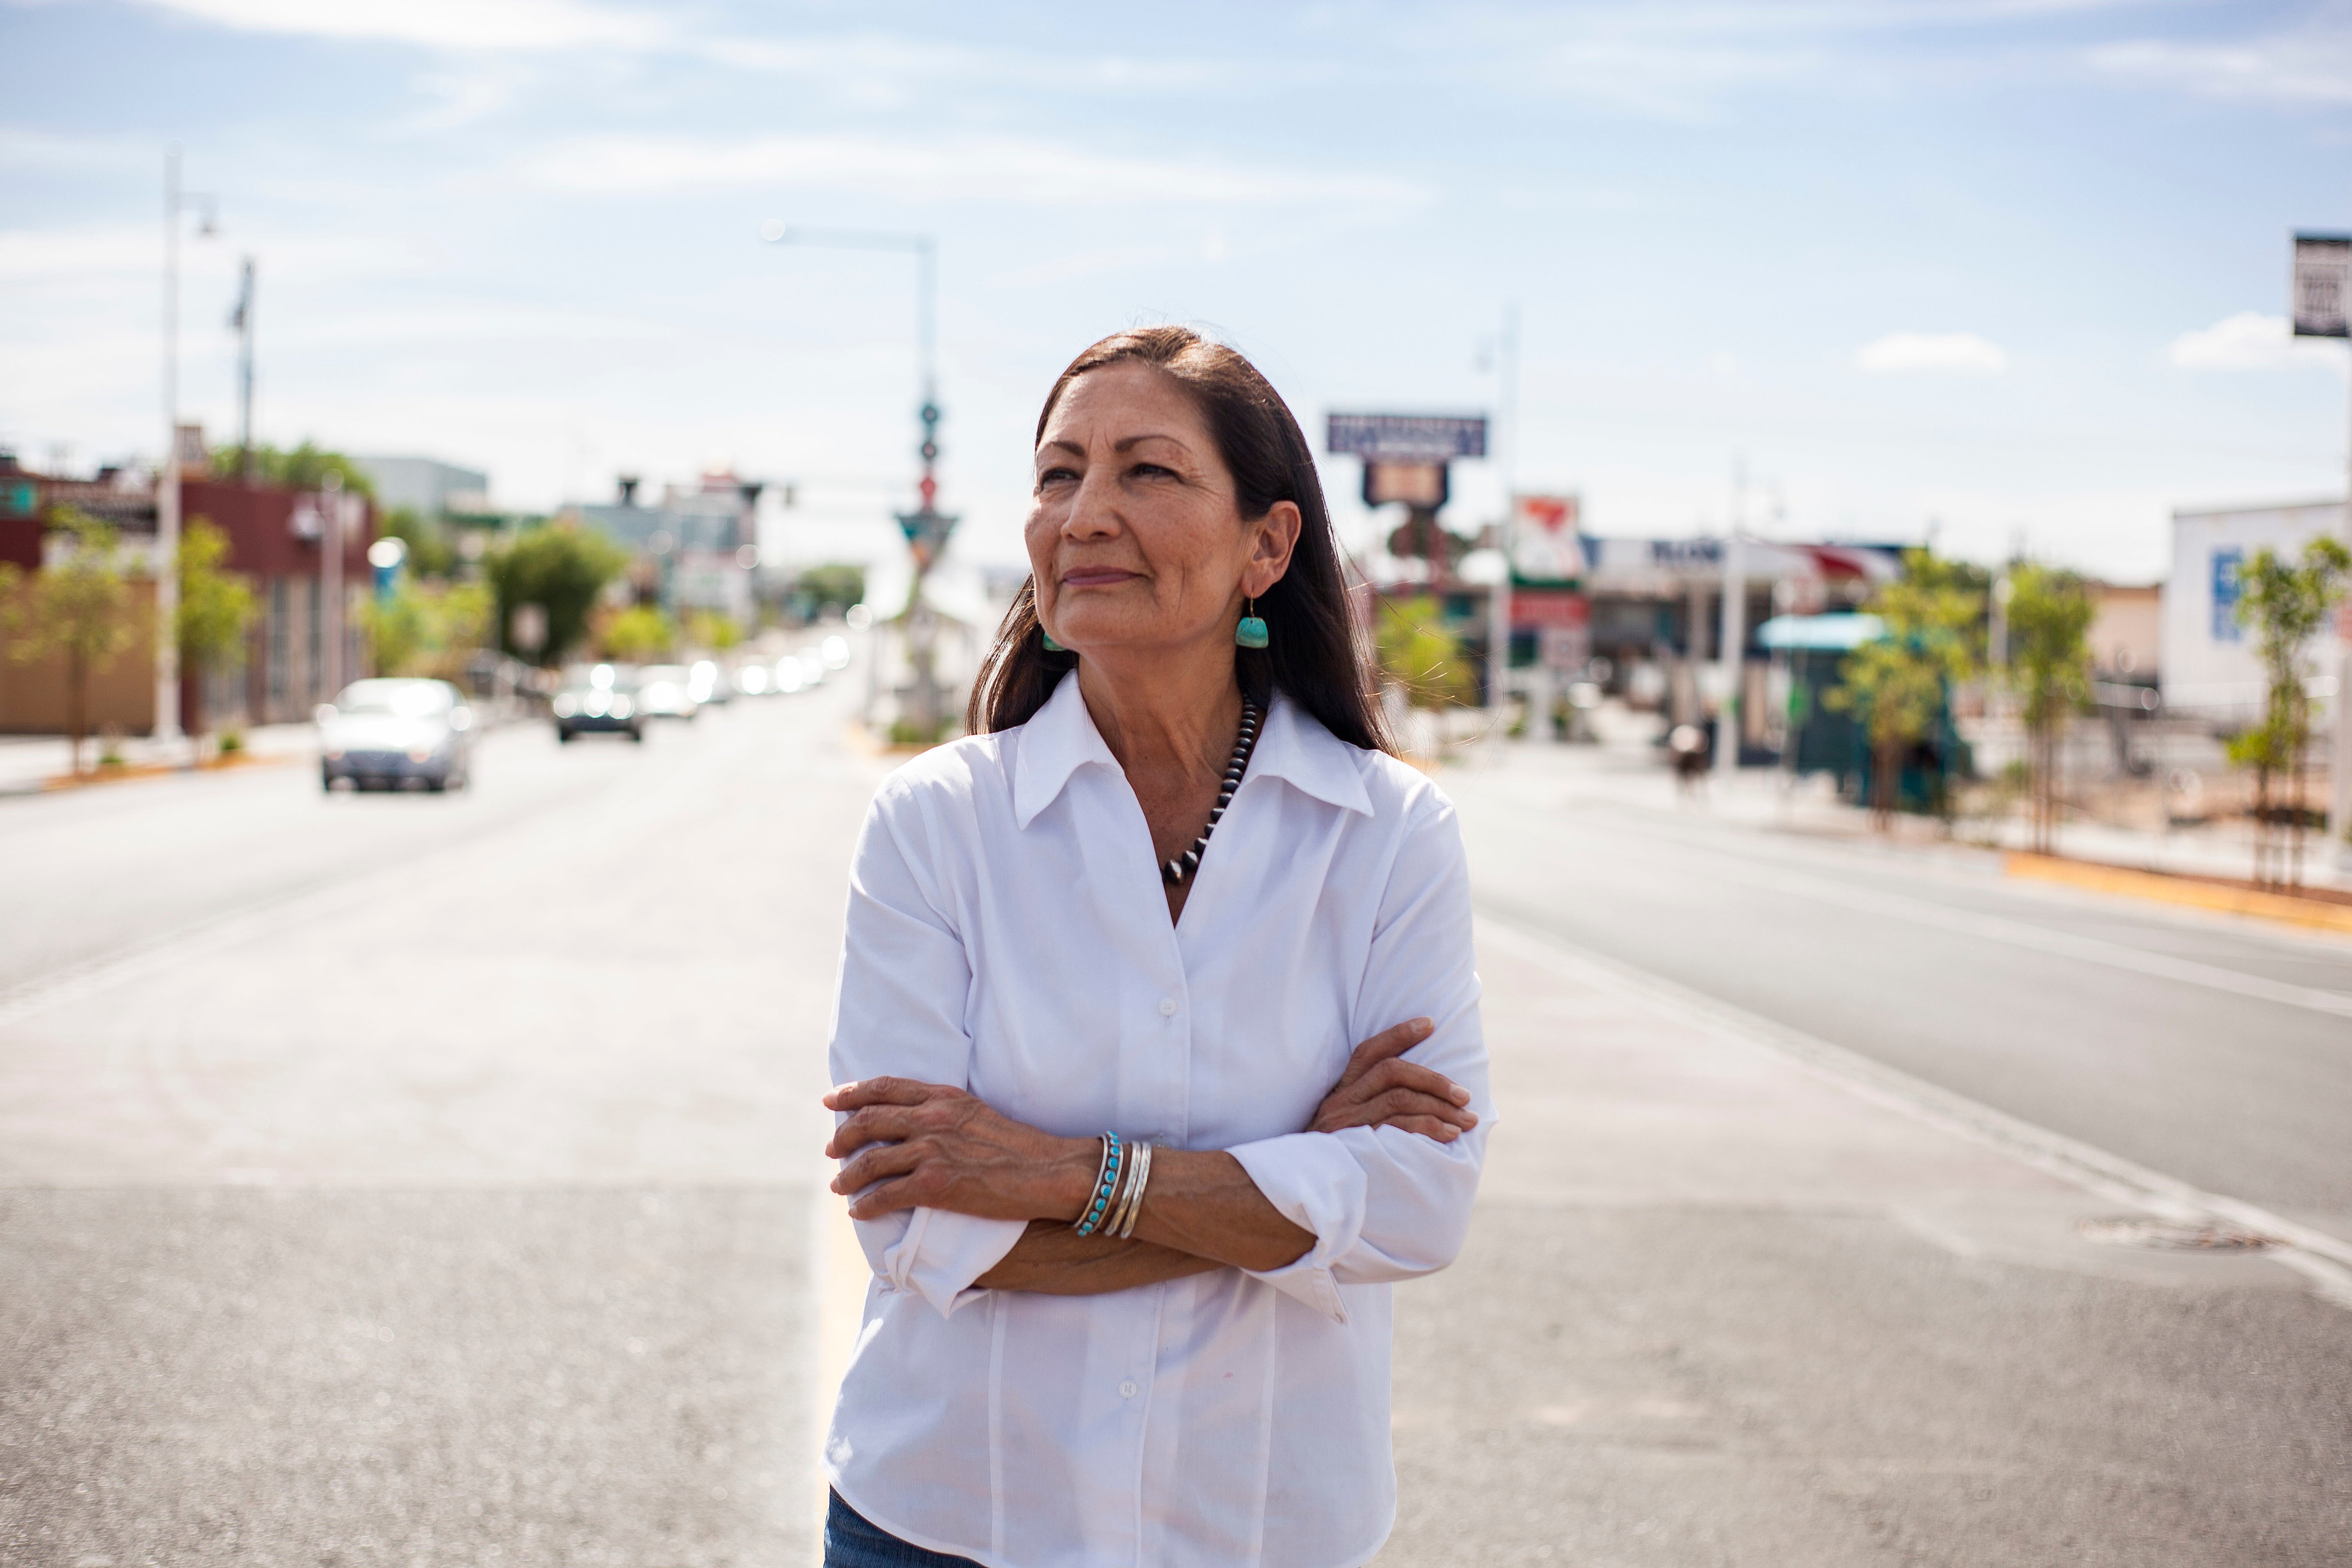 Deb Haaland poses for a portrait in a Nob Hill Neighborhood in Albuquerque, N.M., on June 4, 2018. Haaland, a tribal member of Laguna Pueblo, is aiming to become the first Native American woman in Congress. (Juan Labreche—AP//Shutterstock)